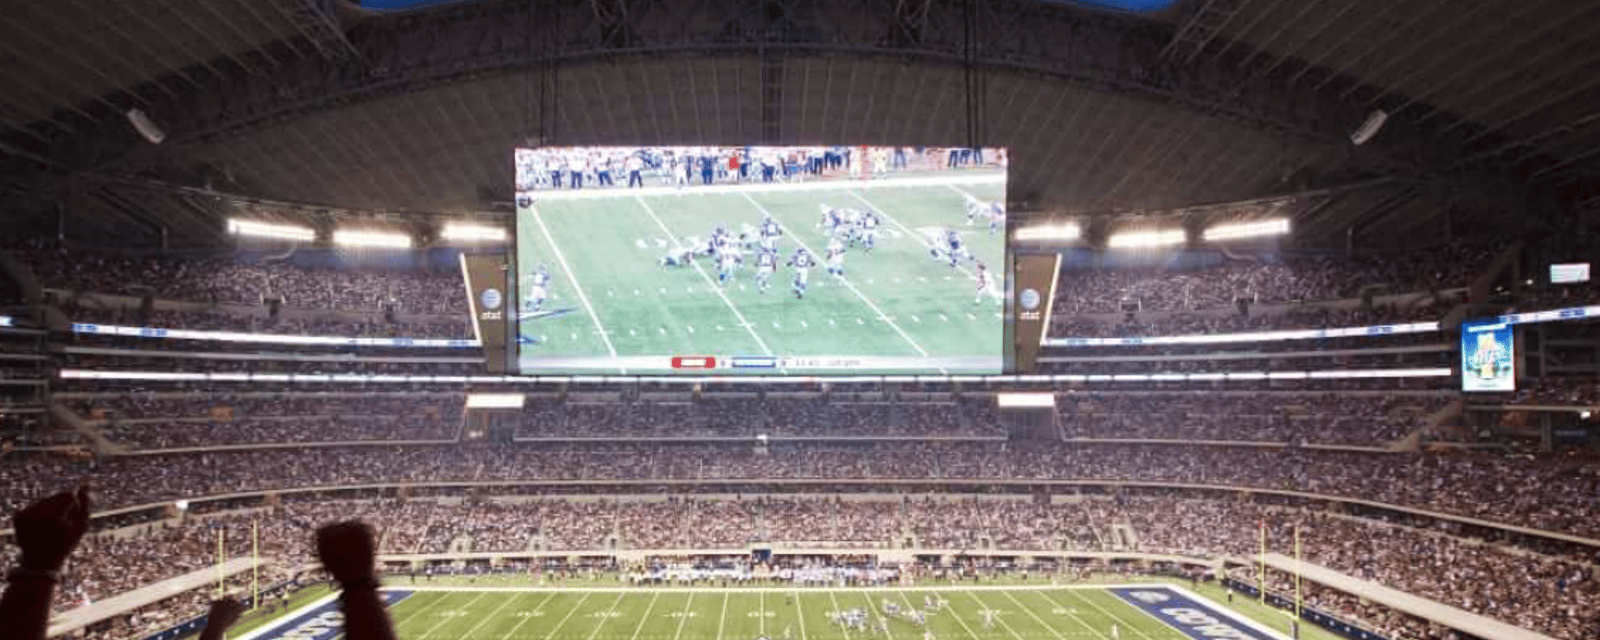 AT&T Stadium employee arrested for illegally allowing fans into building 